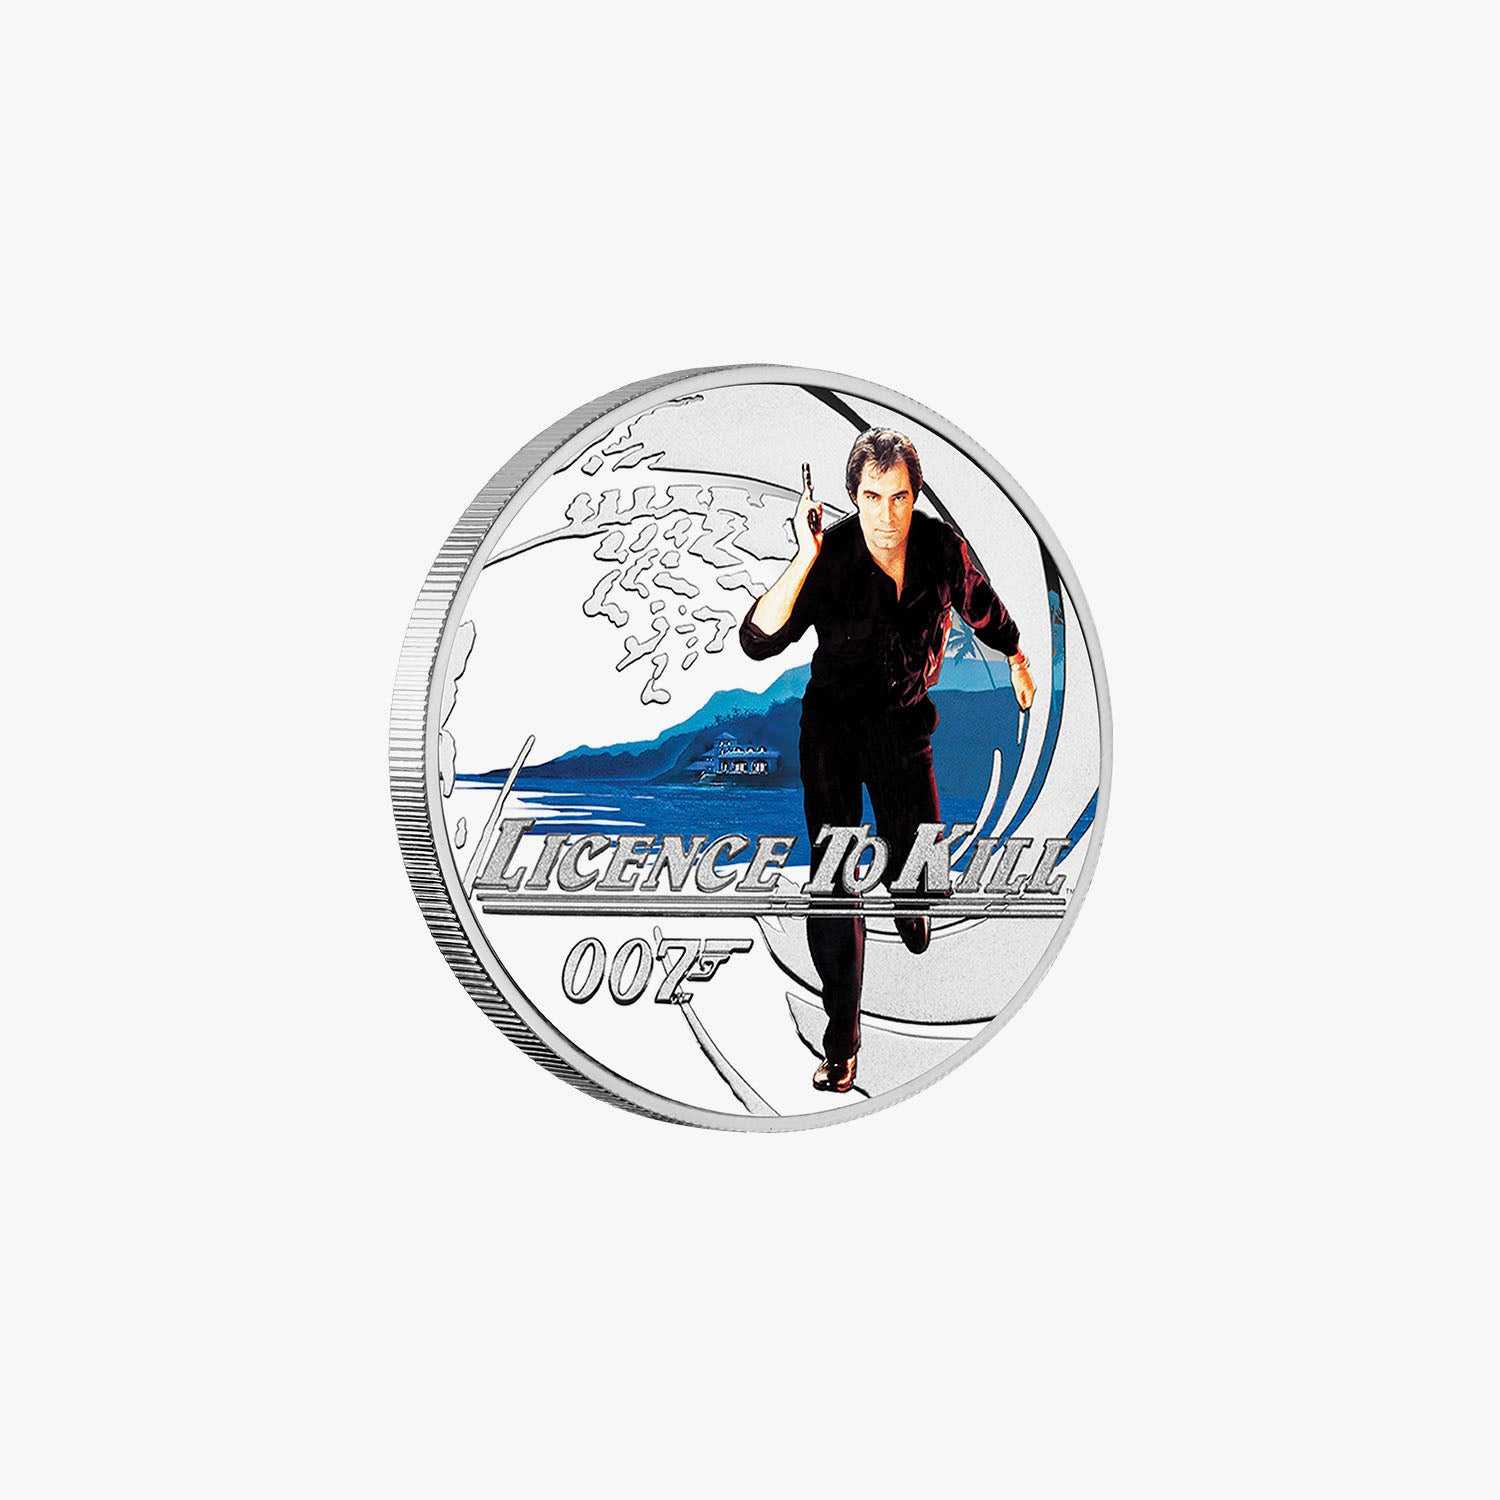 James Bond - License to Kill Solid Silver Movie Coin